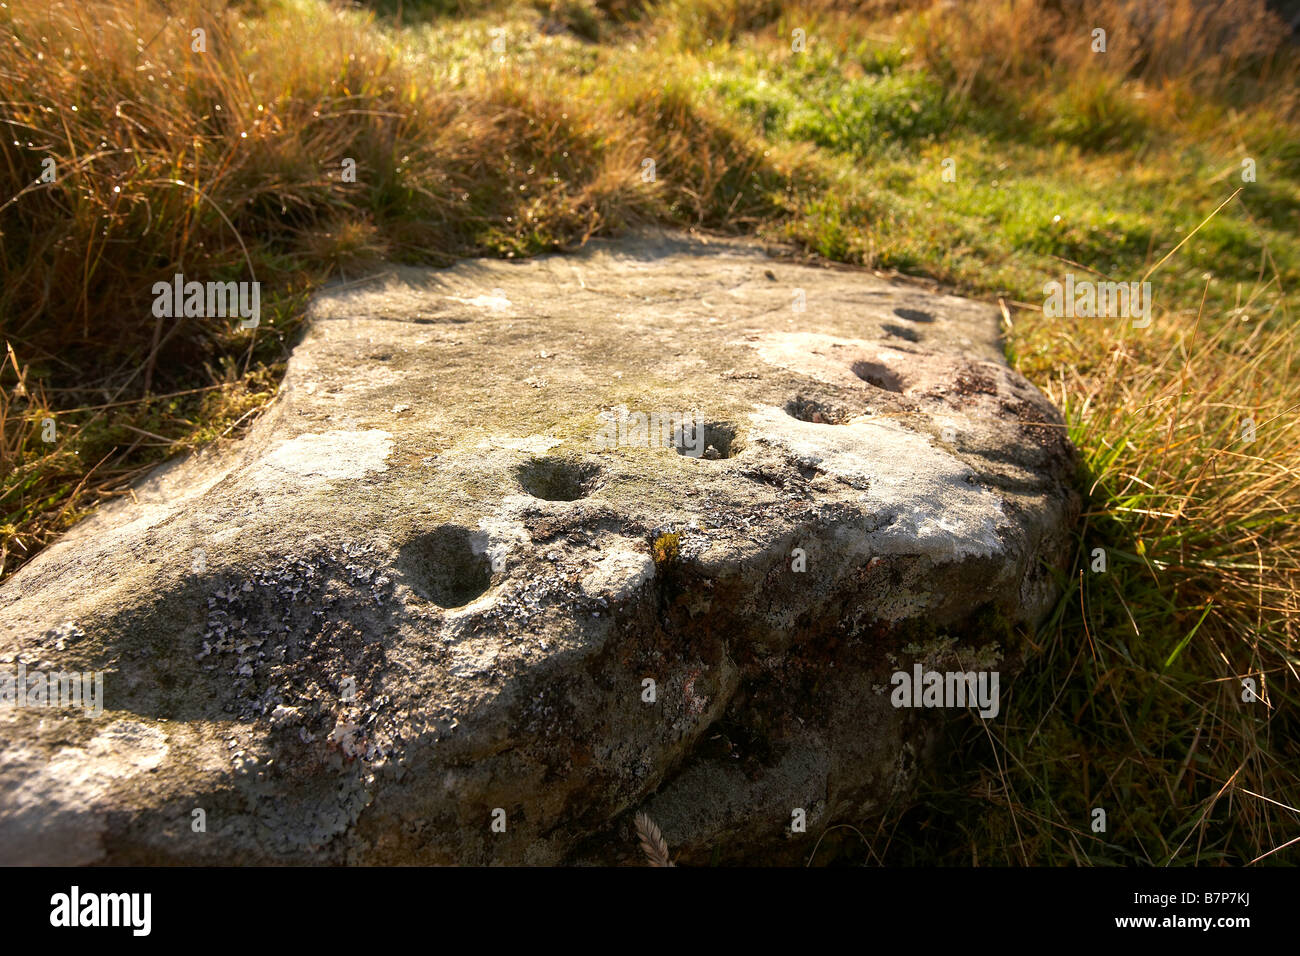 Prehistoric cup and ring marks rock art carved on rock at Brigantium Northumberland England UK Stock Photo